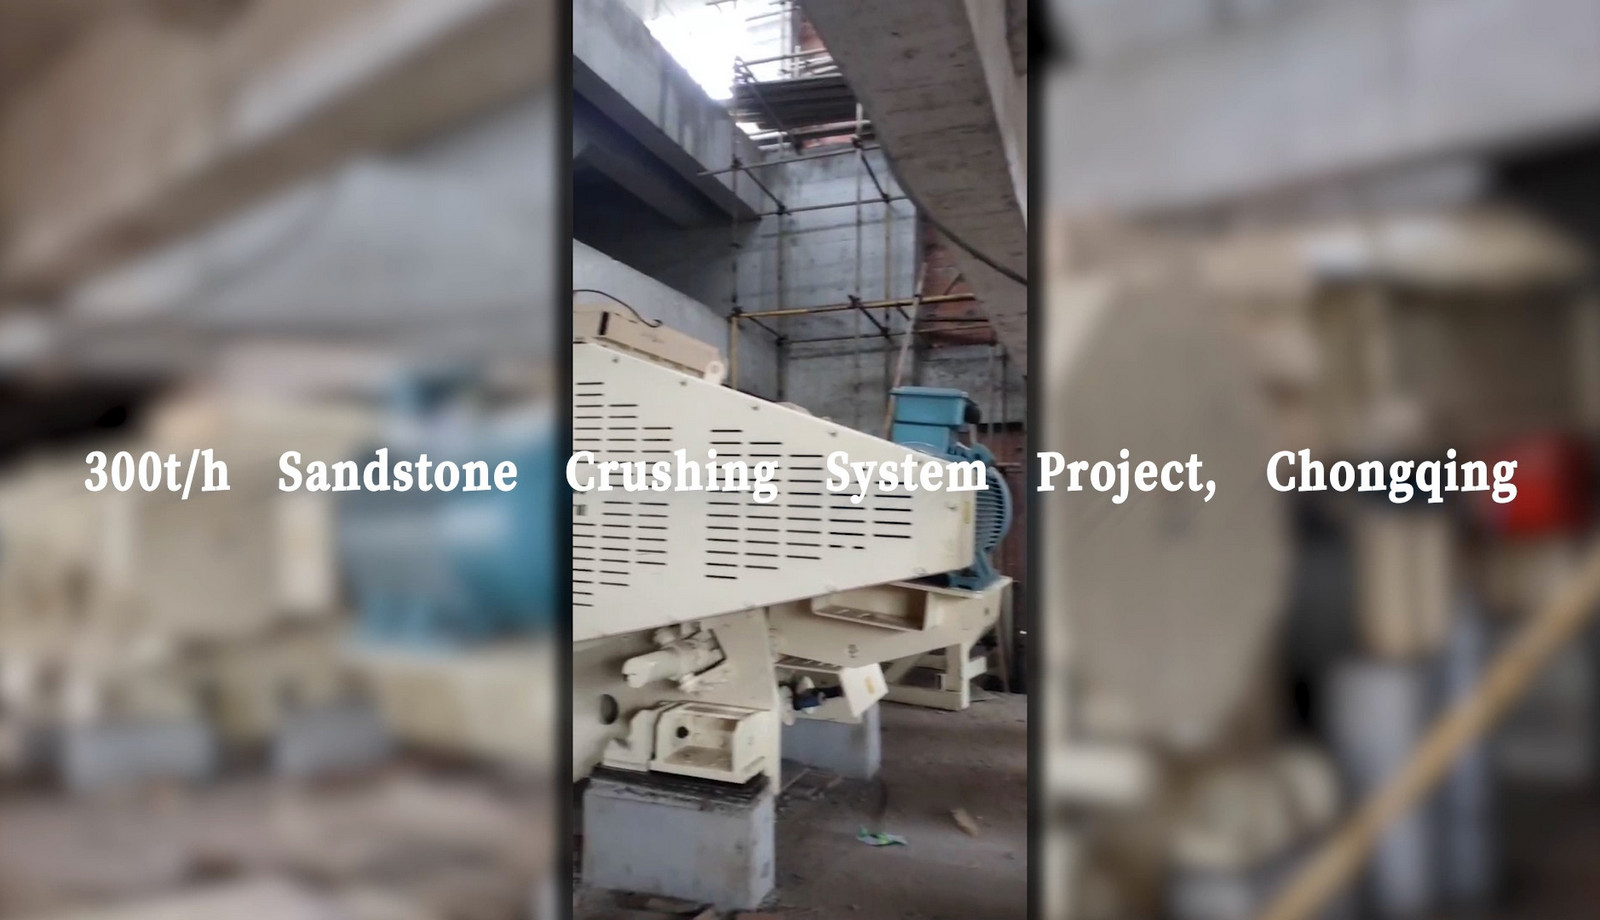 300t/h Sandstone Crushing System Project, Chongqing